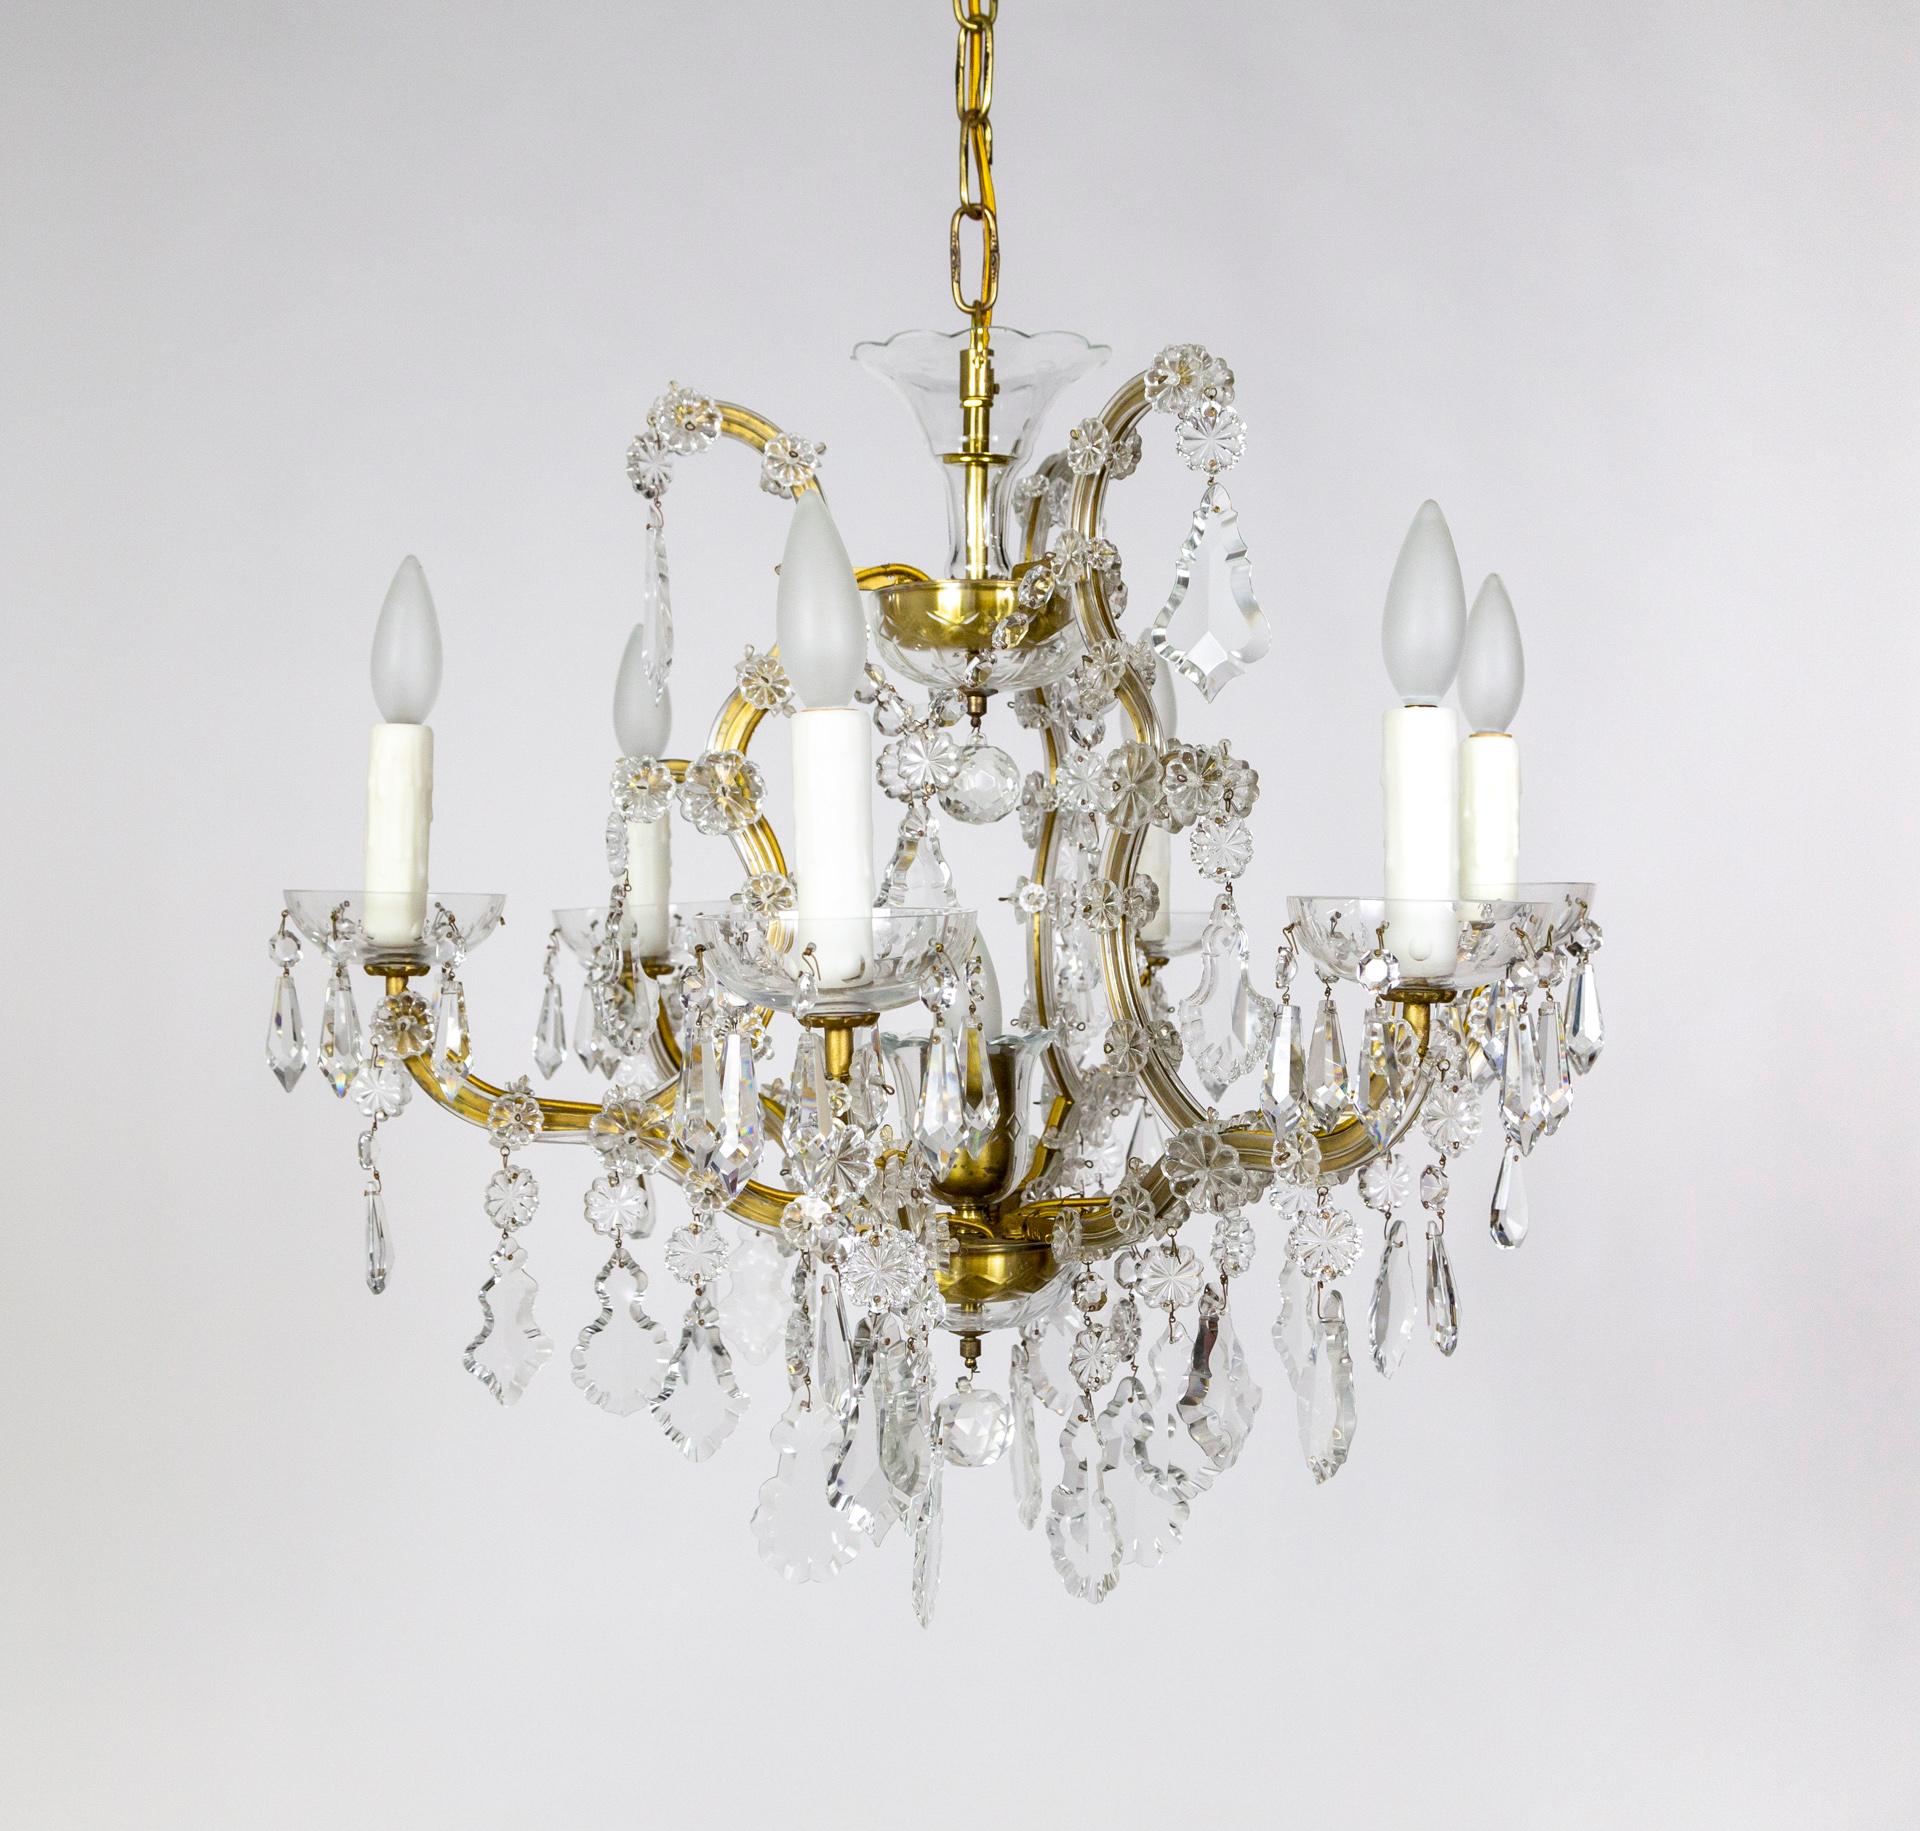 7-Light Multi-Crystal Maria Theresa Chandelier In Good Condition For Sale In San Francisco, CA